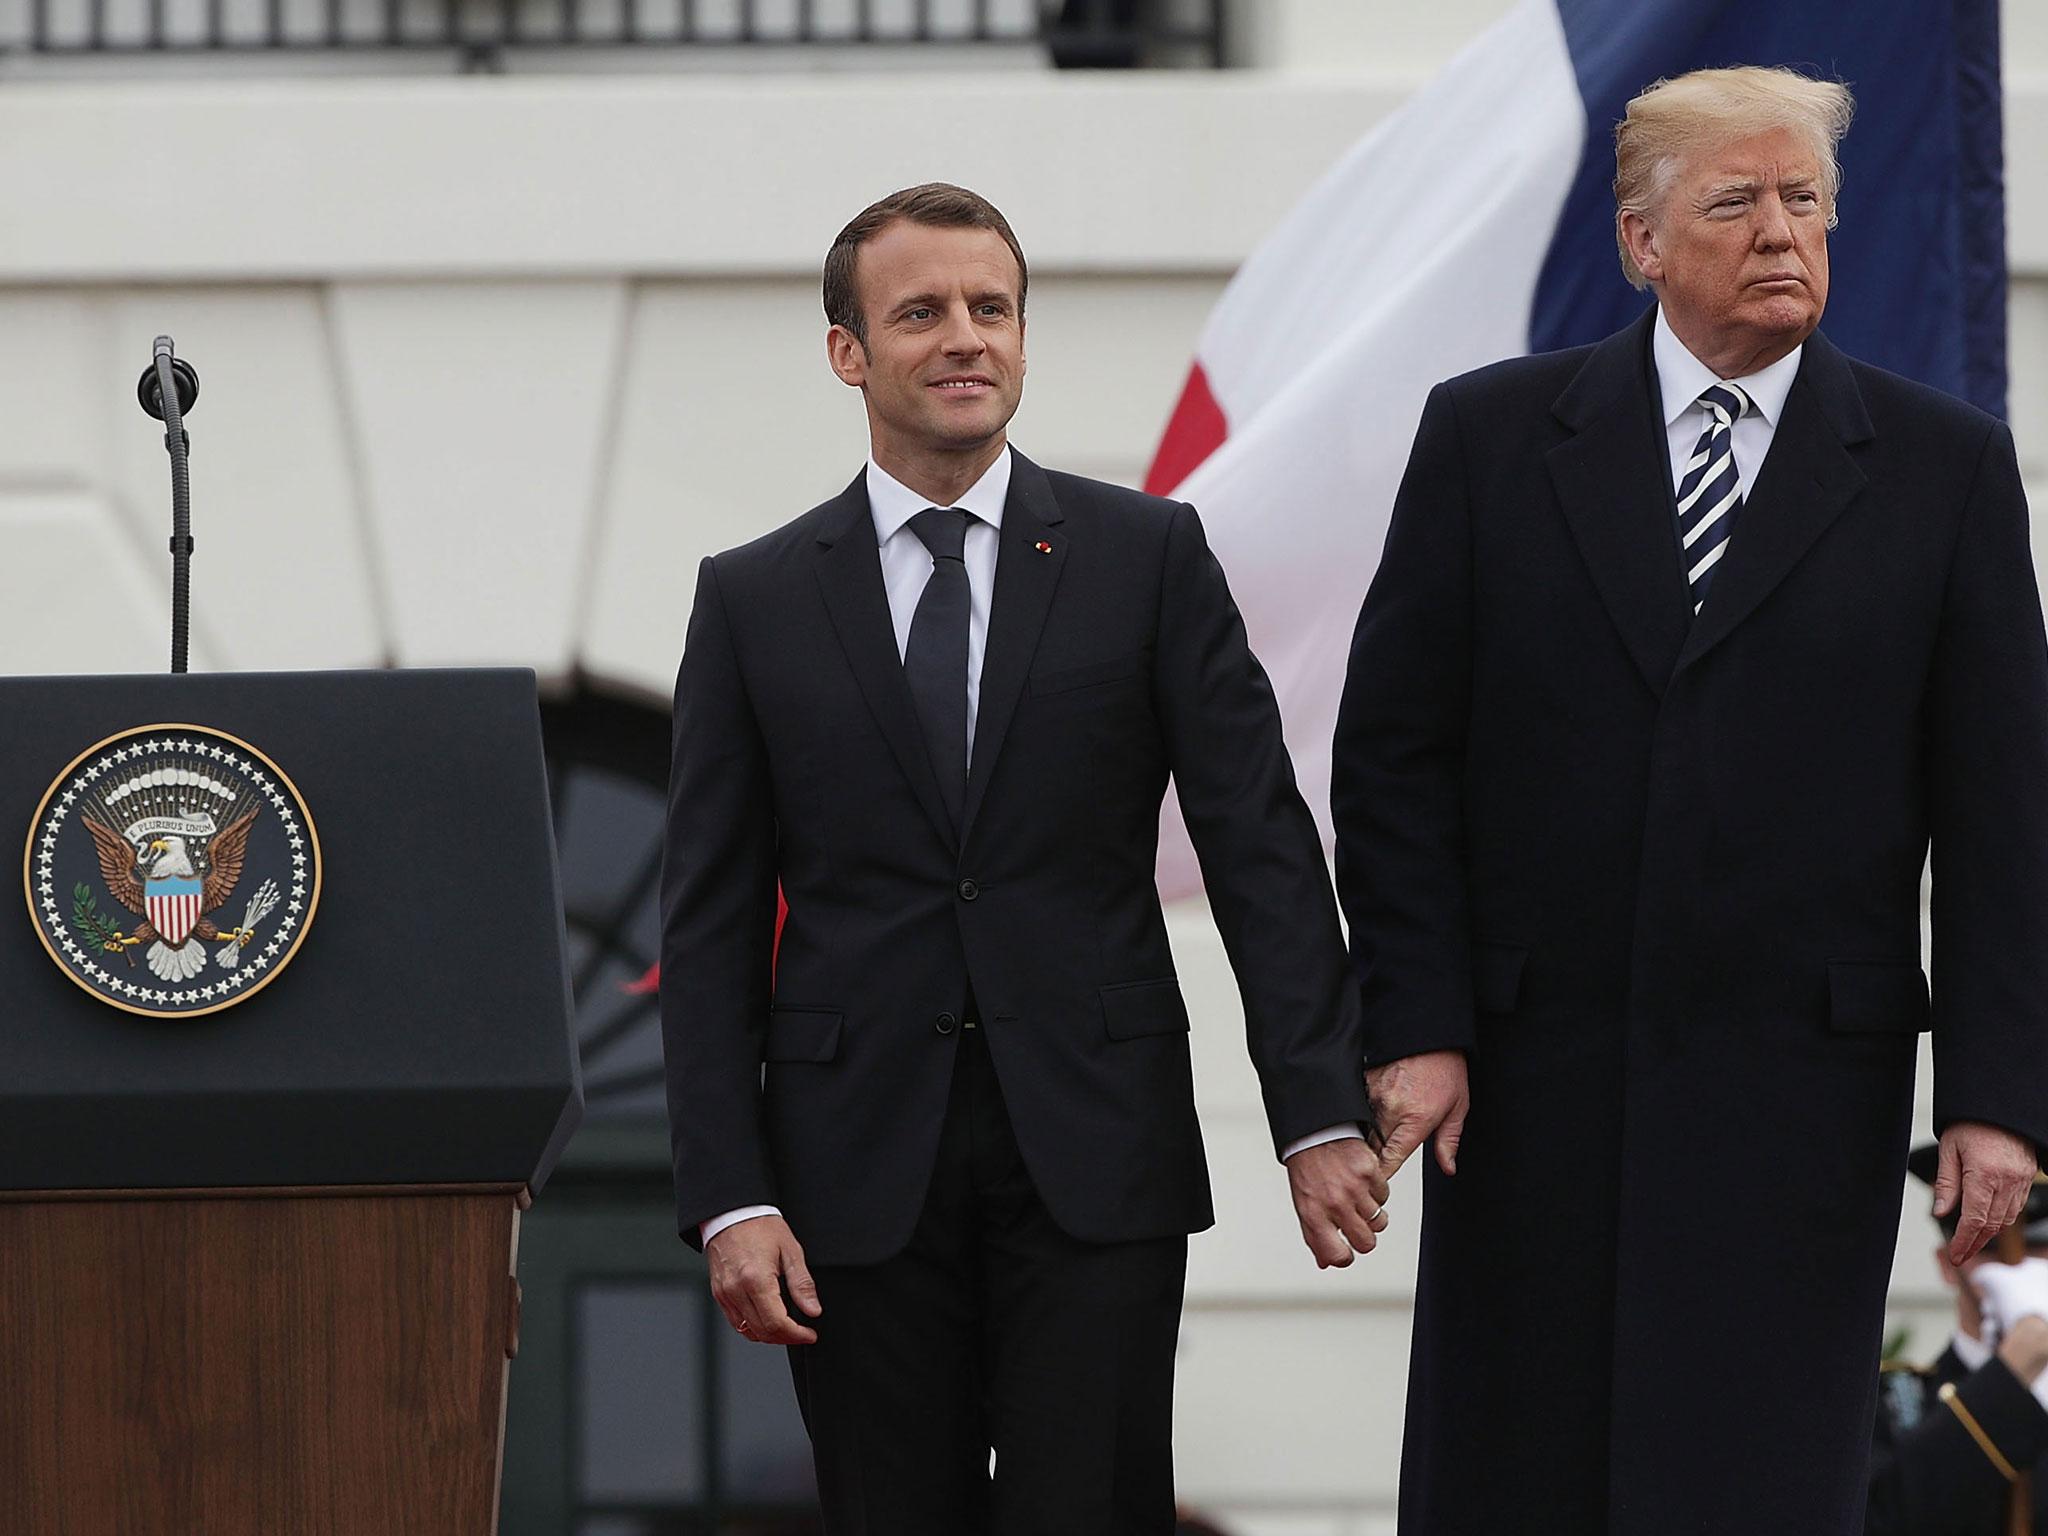 Watch Trump And Macron Awkwardly Touch Each Other In Series Of